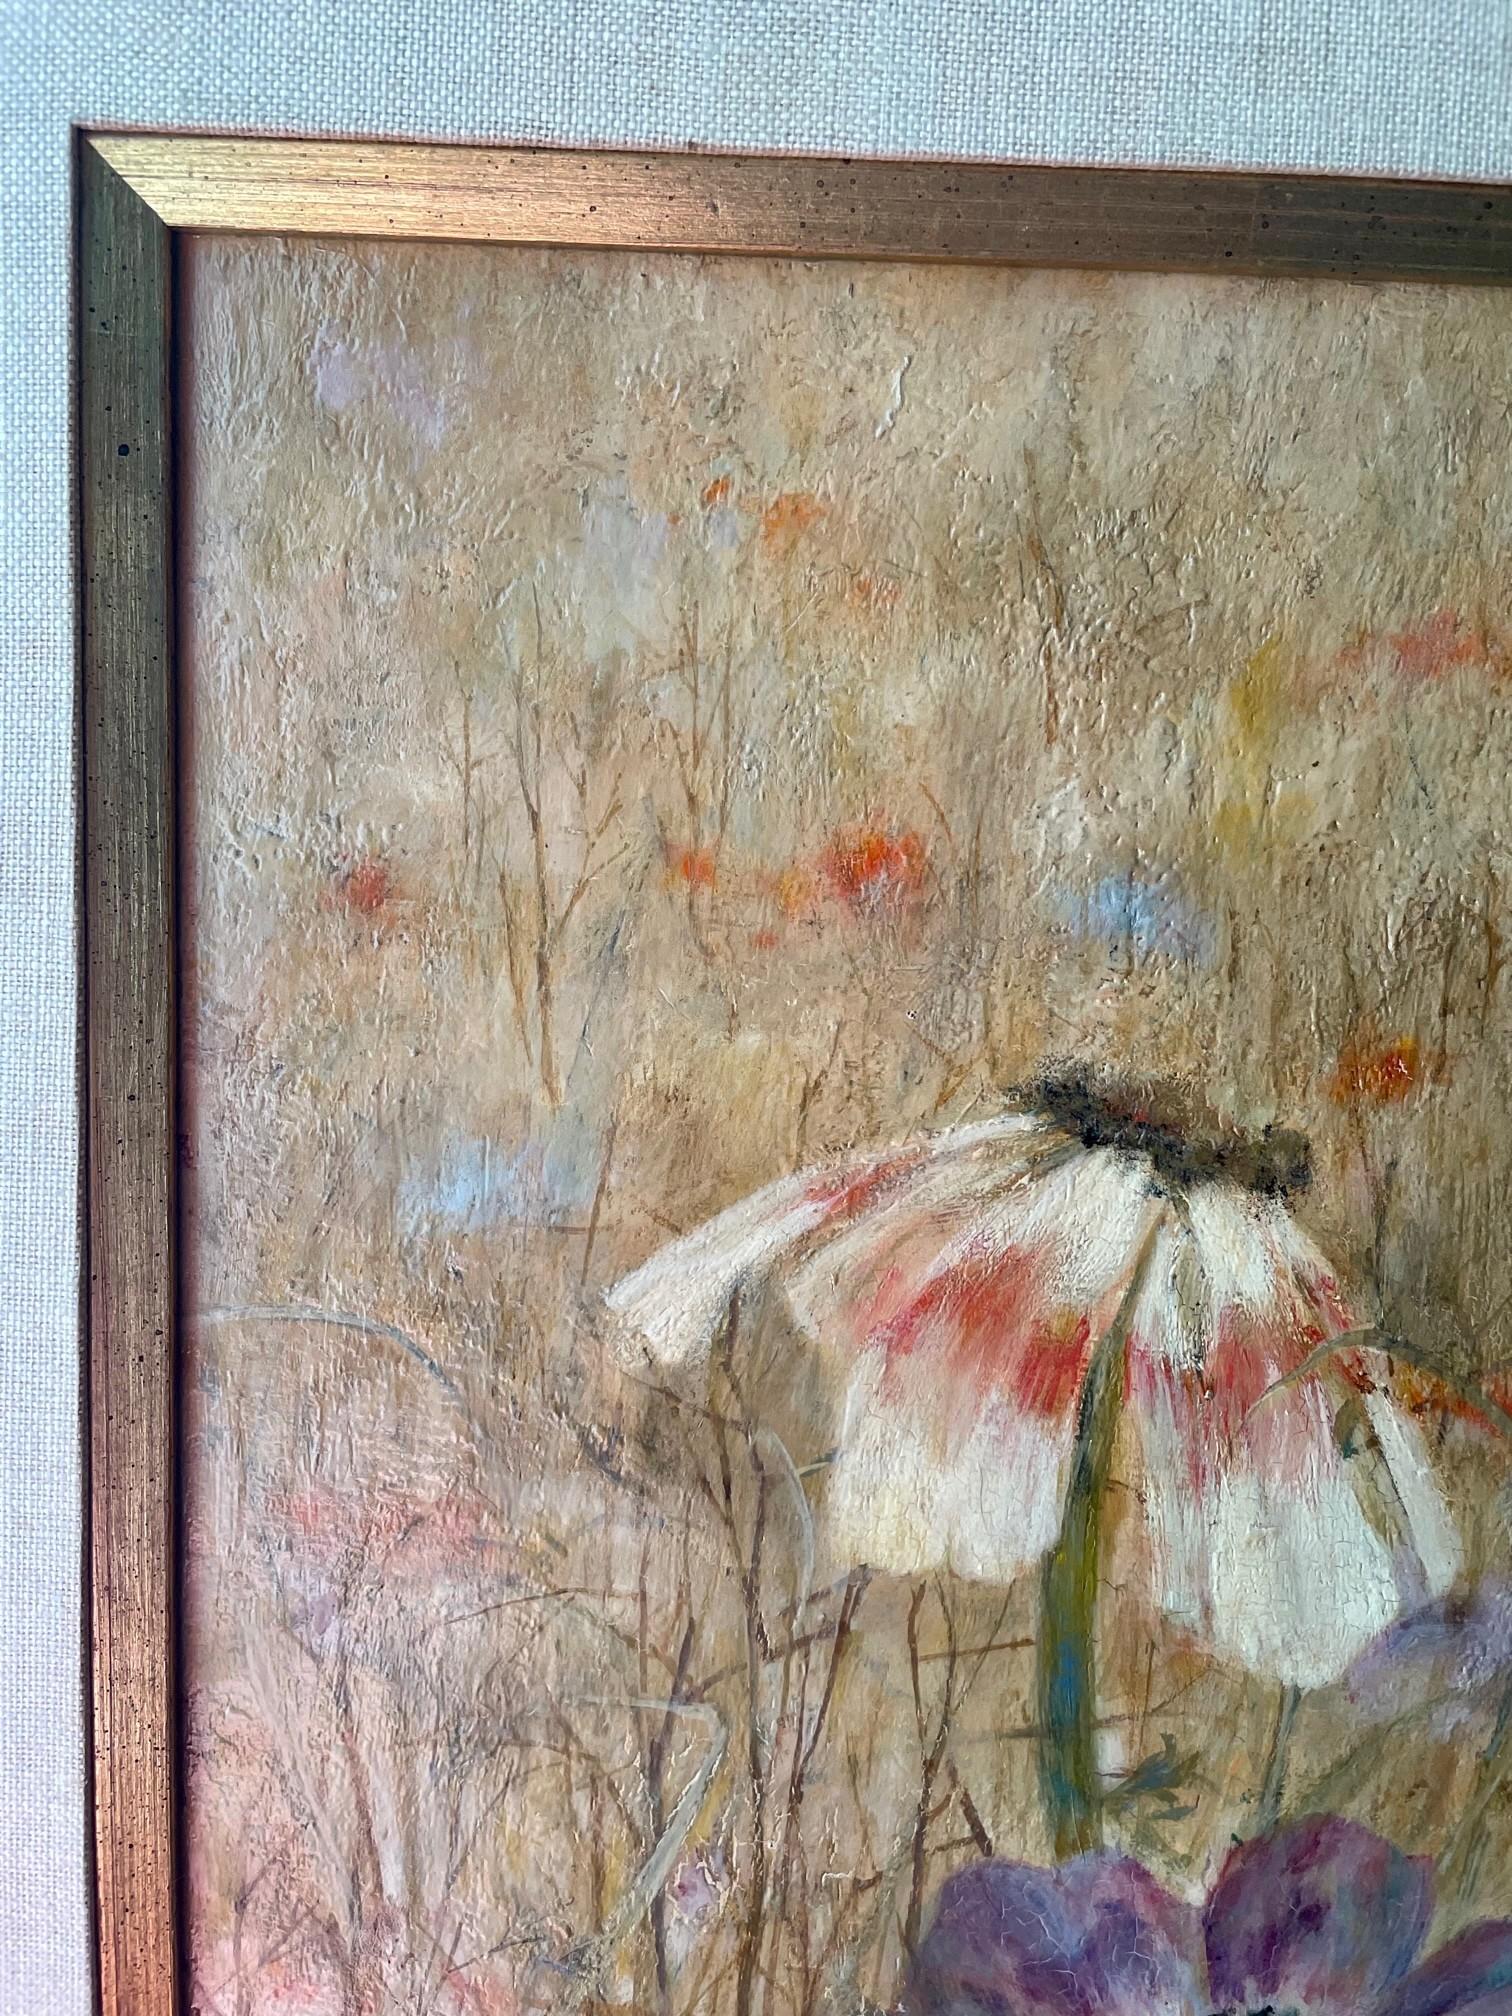 Impressionist Flower Still Life Painting New Hope School.

Beautiful Poppy flower still life painting in oil on masonite. It is a representation of the Pennsylvania Impressionist Movement from the circle of Mary Elizabeth Price. The mid-century